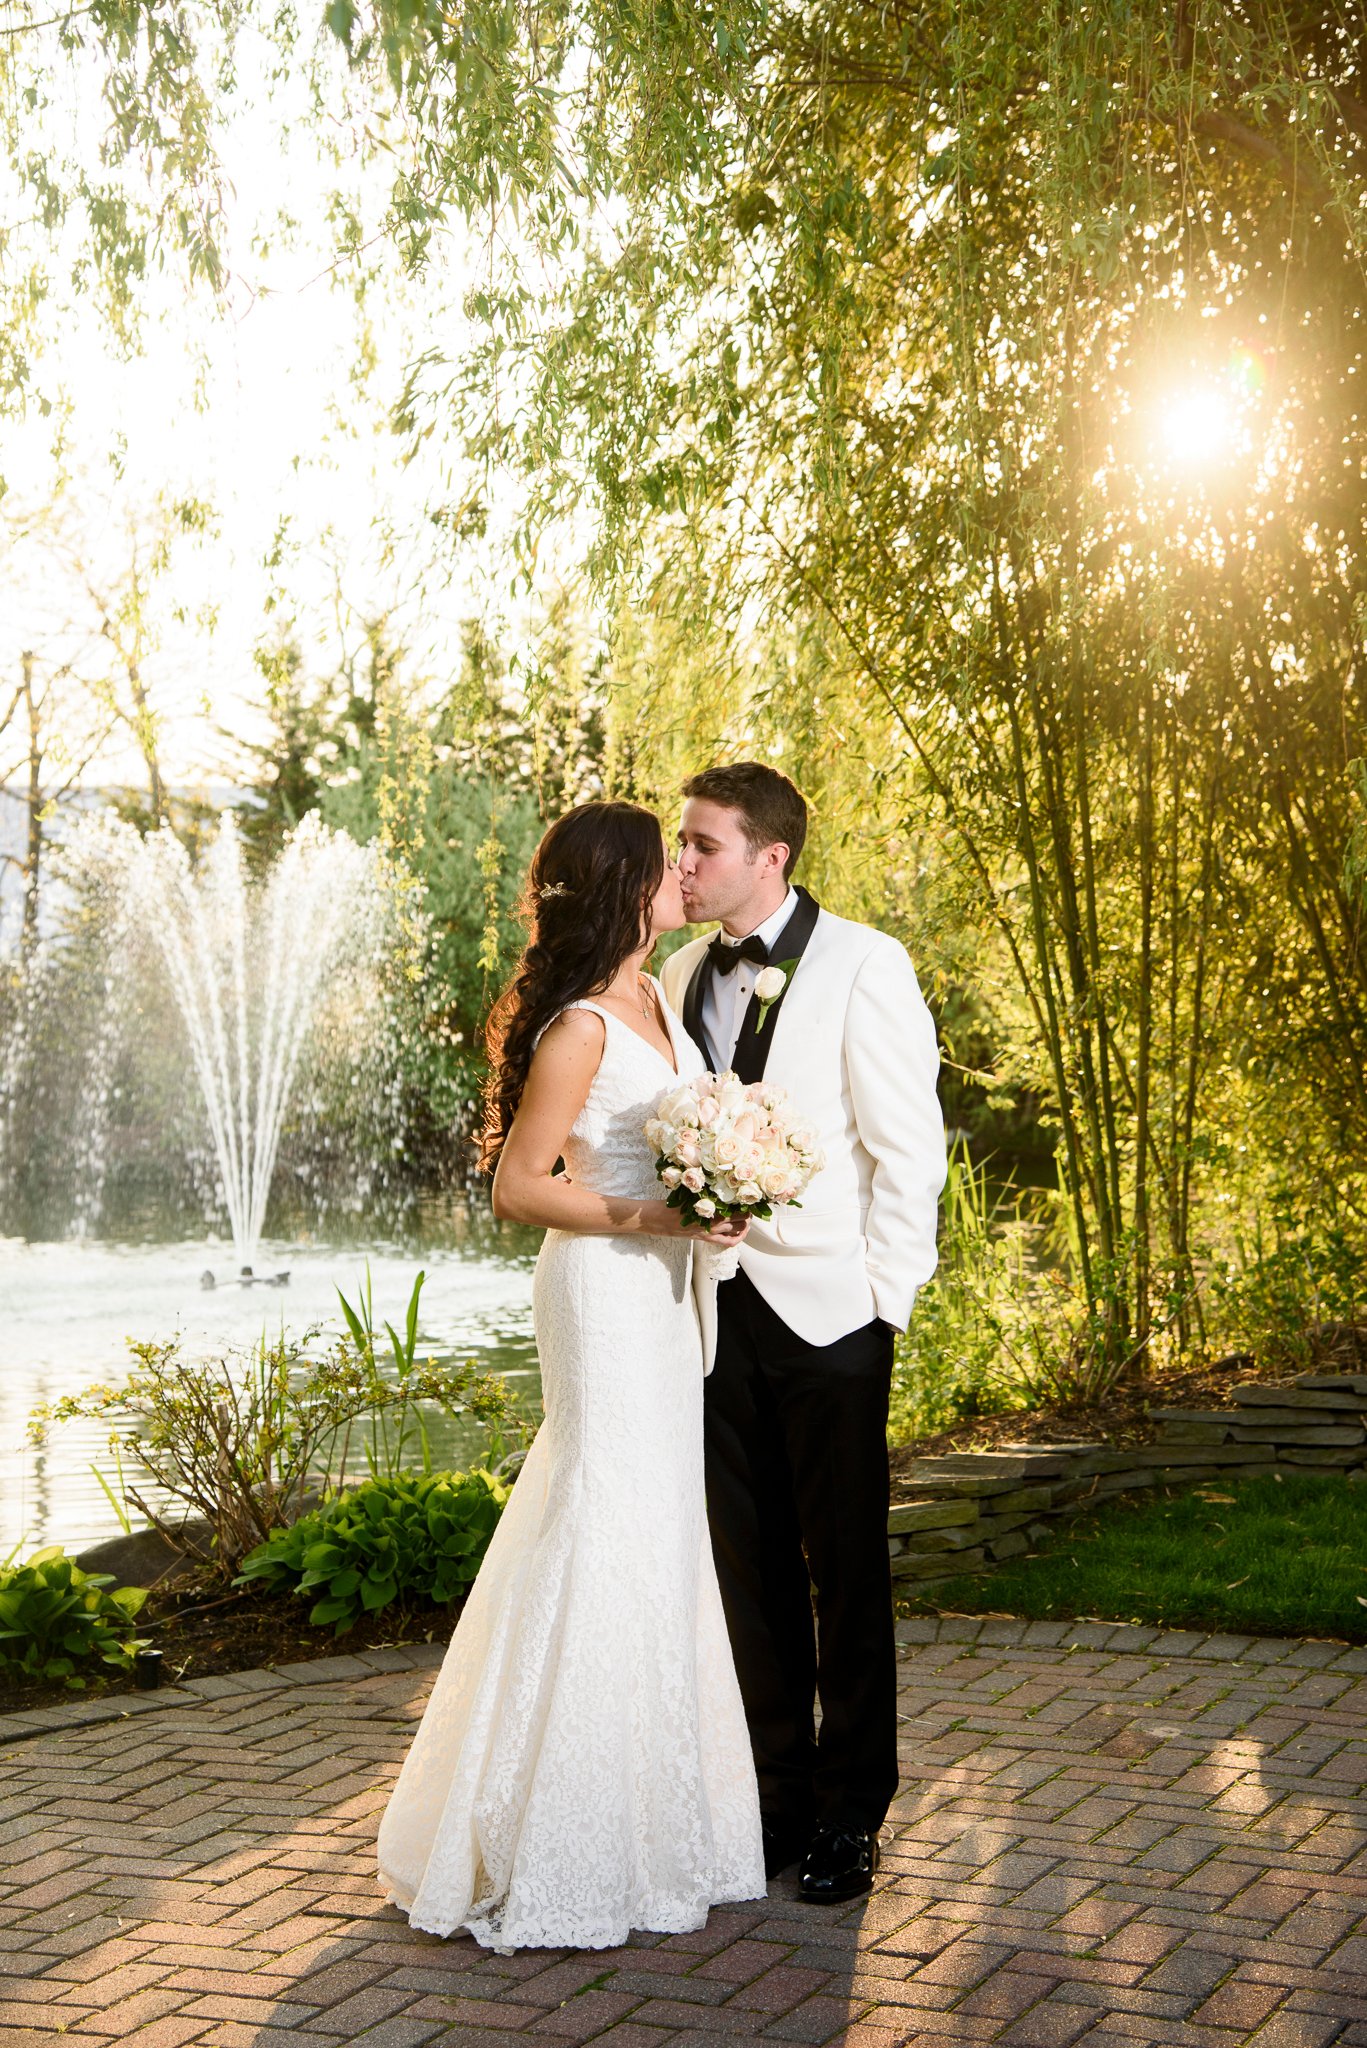 Light and Airy Wedding Photos at The North Ritz Club